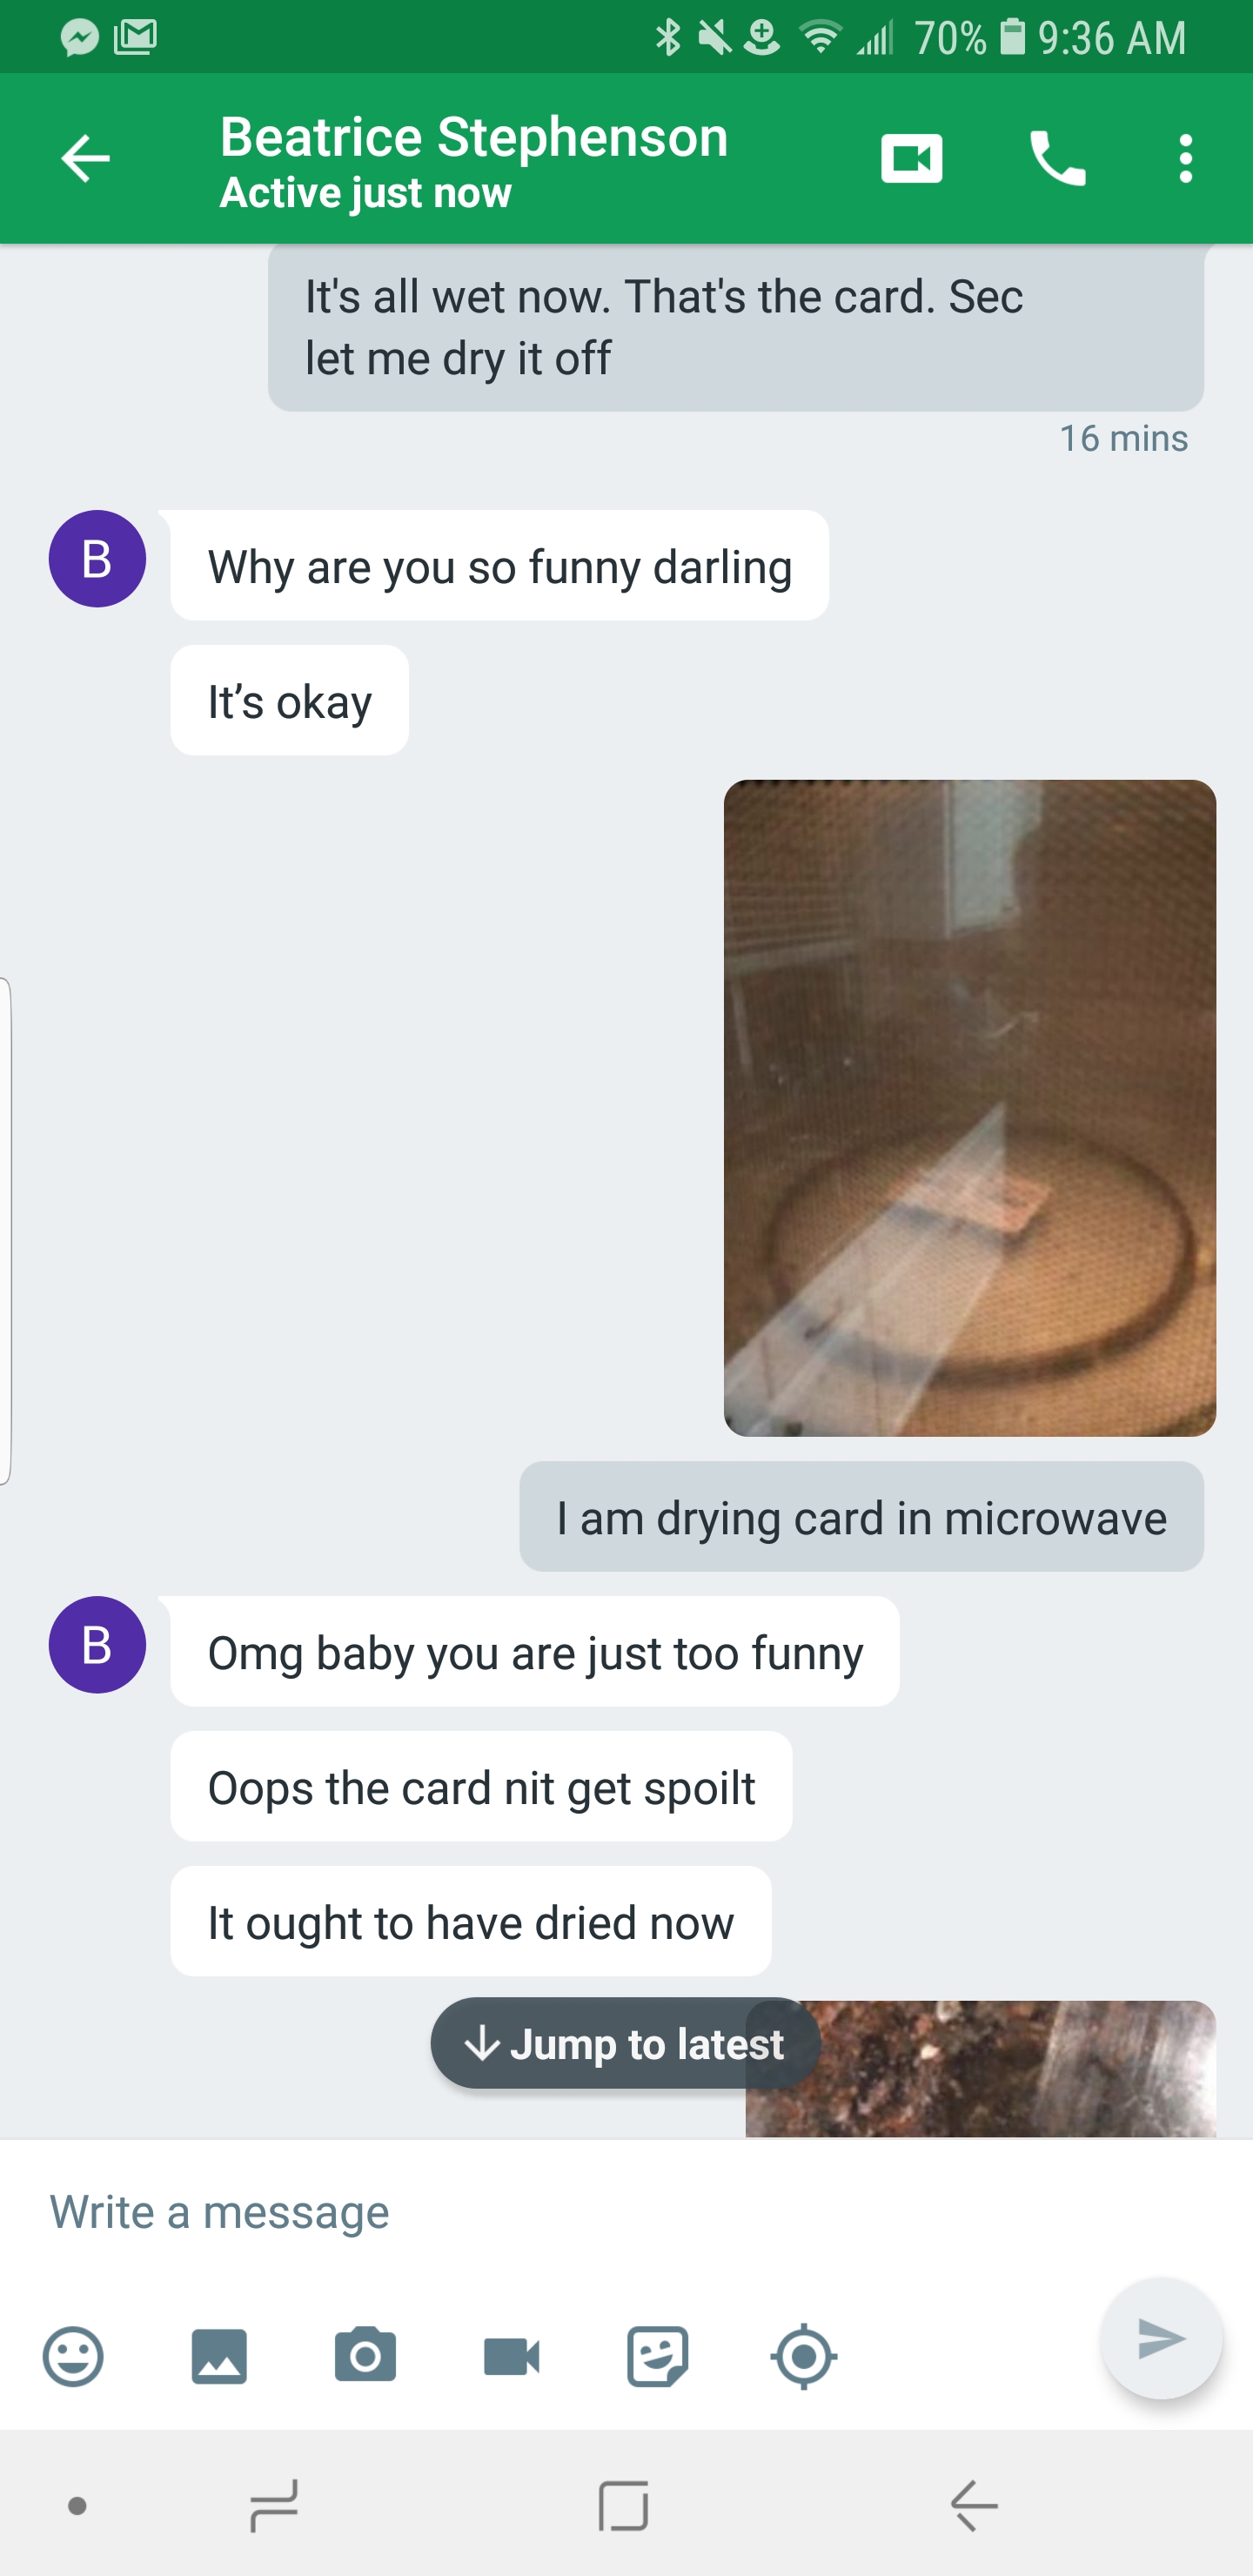 screenshot - 4 70 9.36 Am 9 Beatrice Stephenson Active just now It's all wet now. That's the card Sec let me dry it off Why are you so funny darling It's okay I am drying card in microwave Omg baby you are just too funny Oops the card nit get spoilt It ou